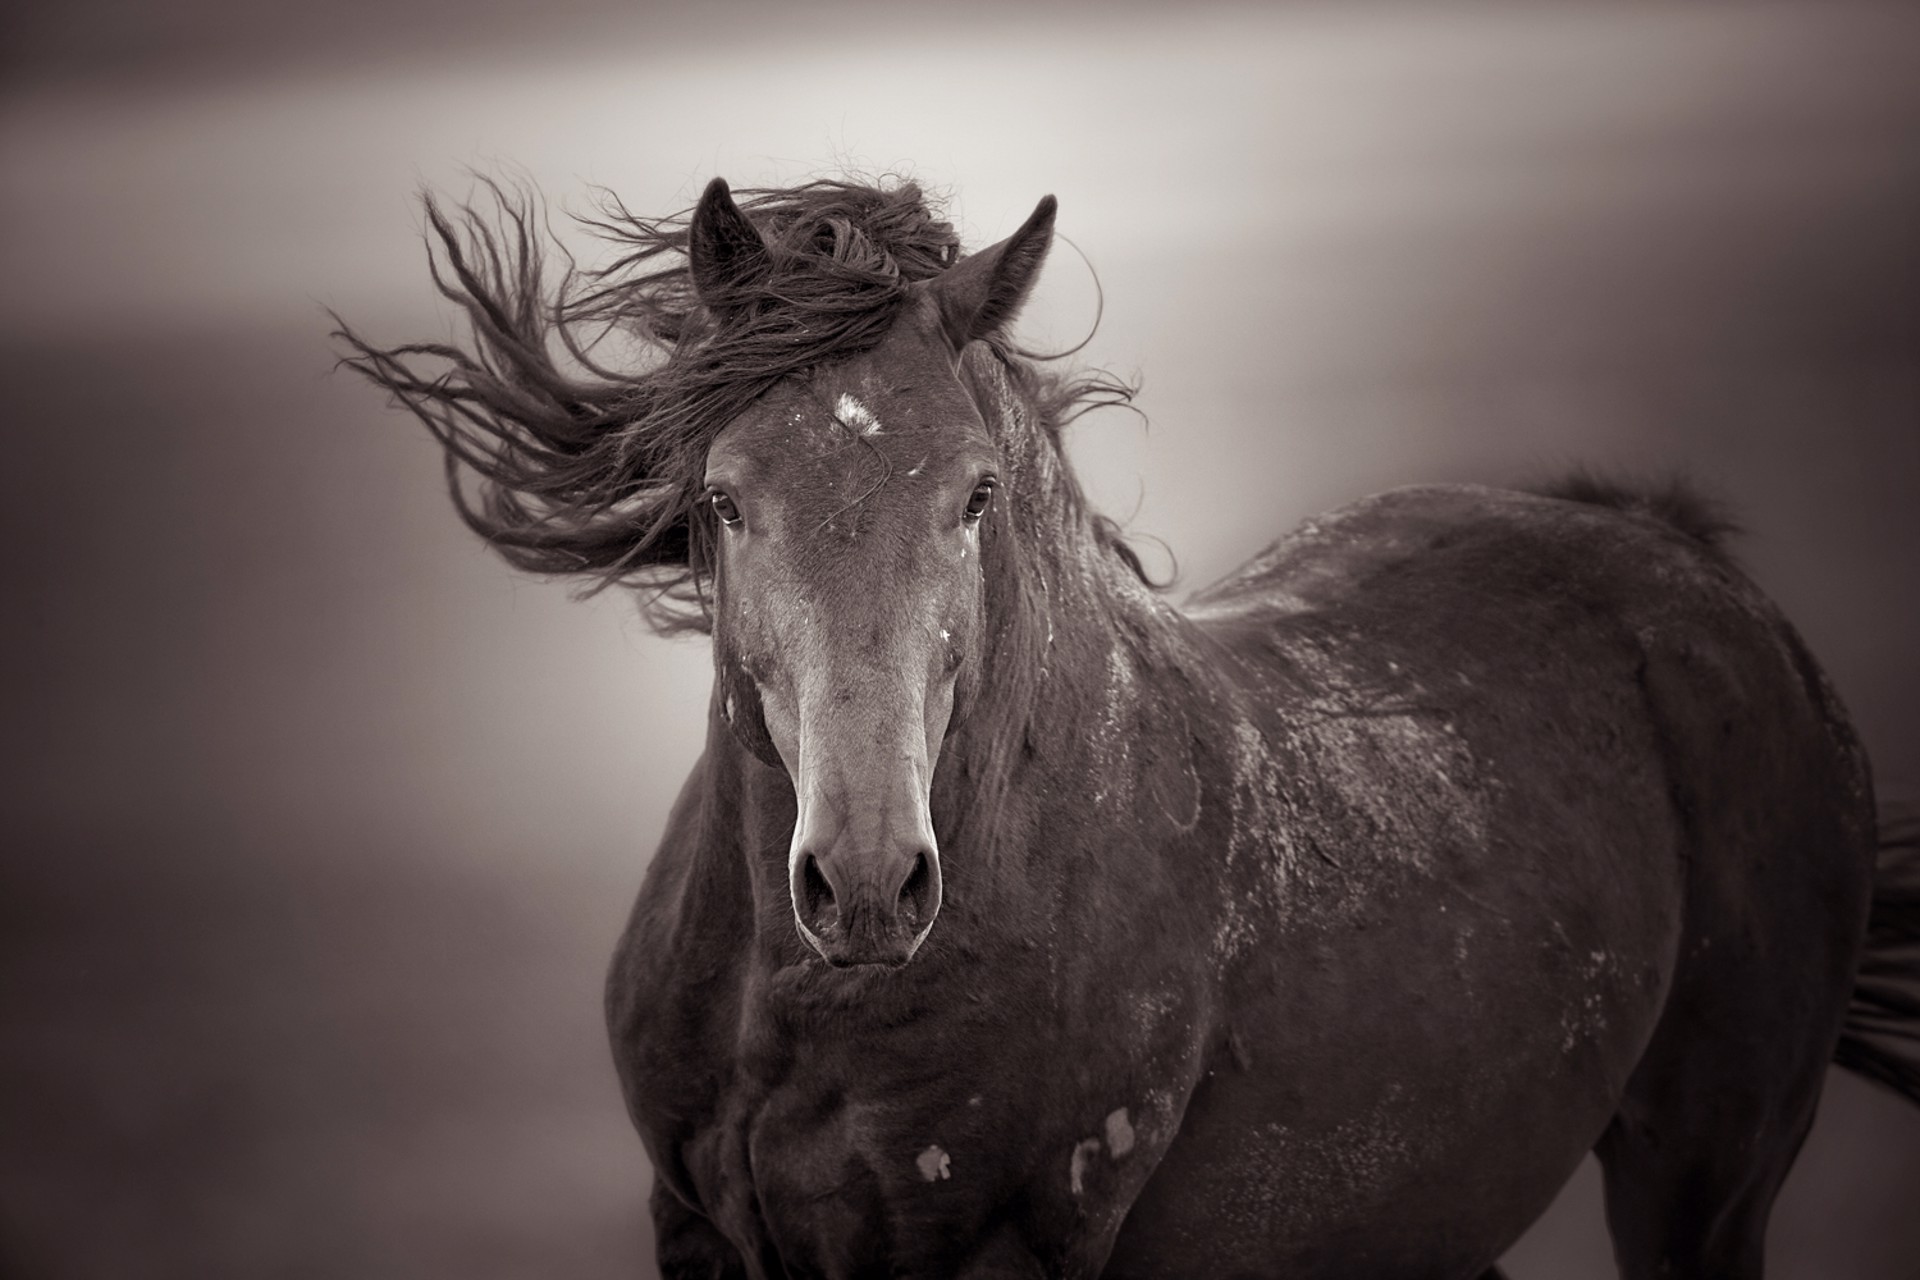 Black and White Photograph Featuring A Dark Wild Horse Facing The Camera